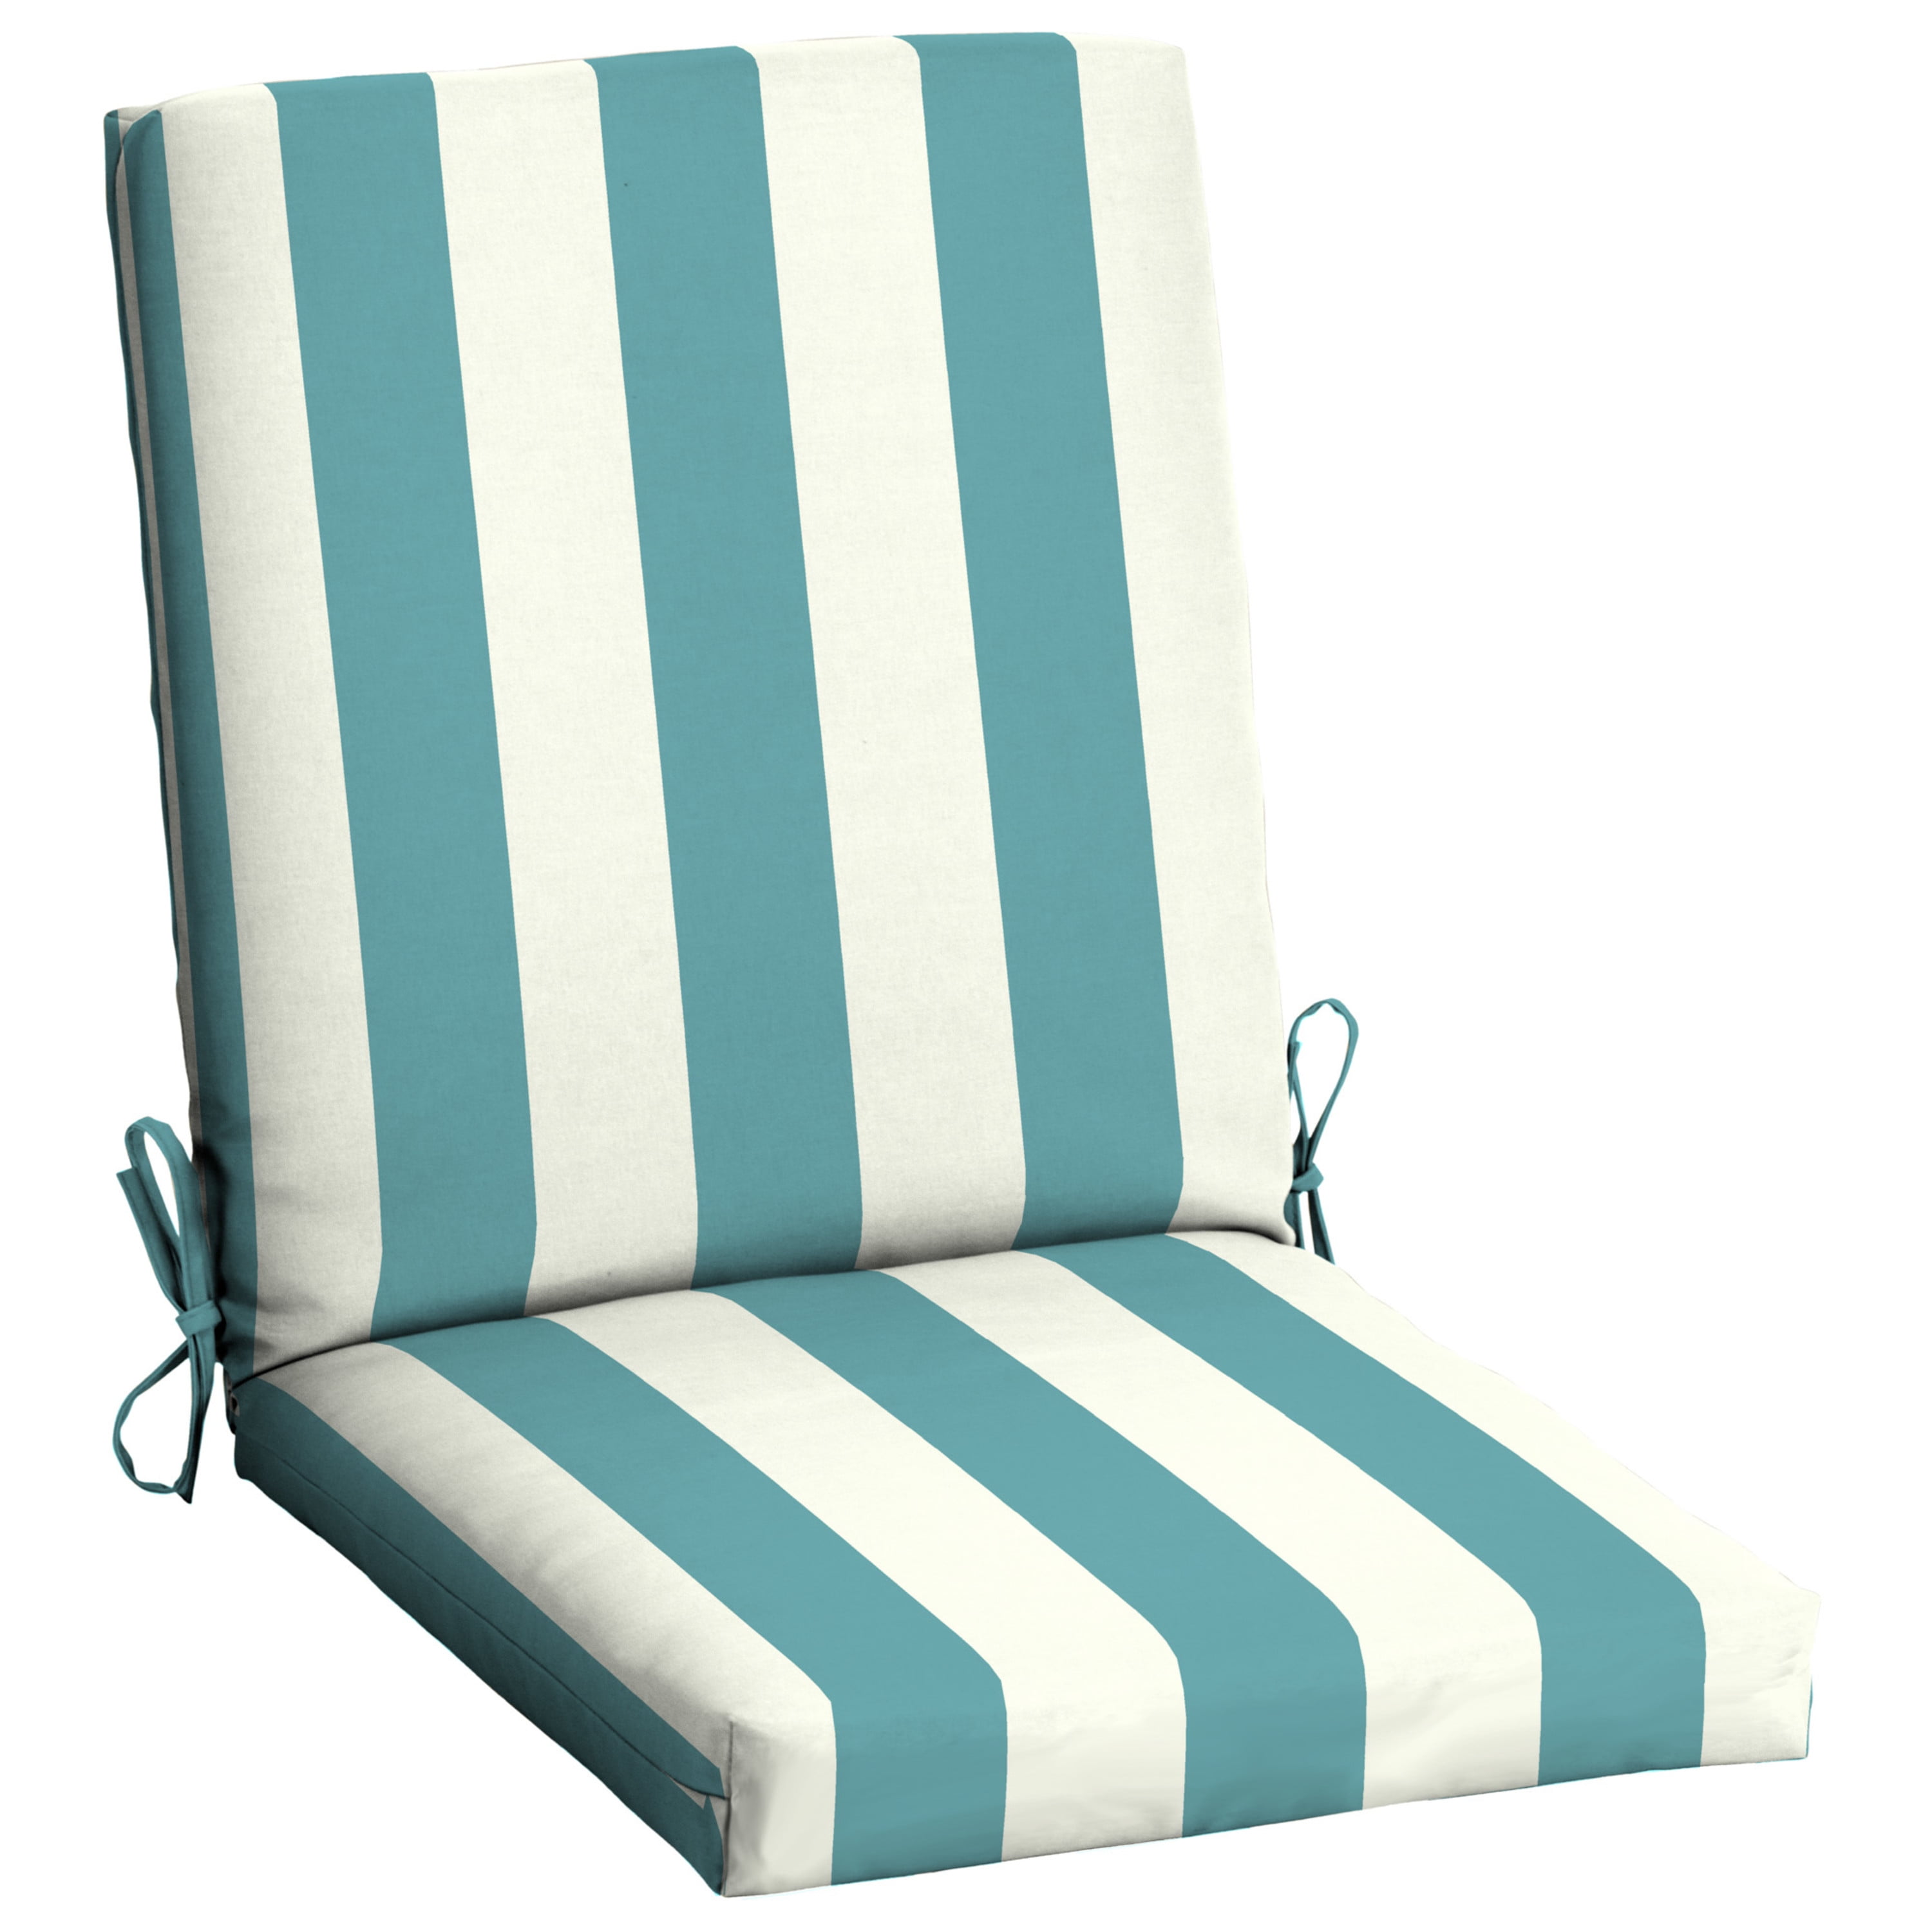 Set of 4 Blue Stripes Outdoor Throw Sofa Couch Pillow Covers, Outside Pillows  Package, Lawn Chair Cushions Sets, Decorative Furniture Home 